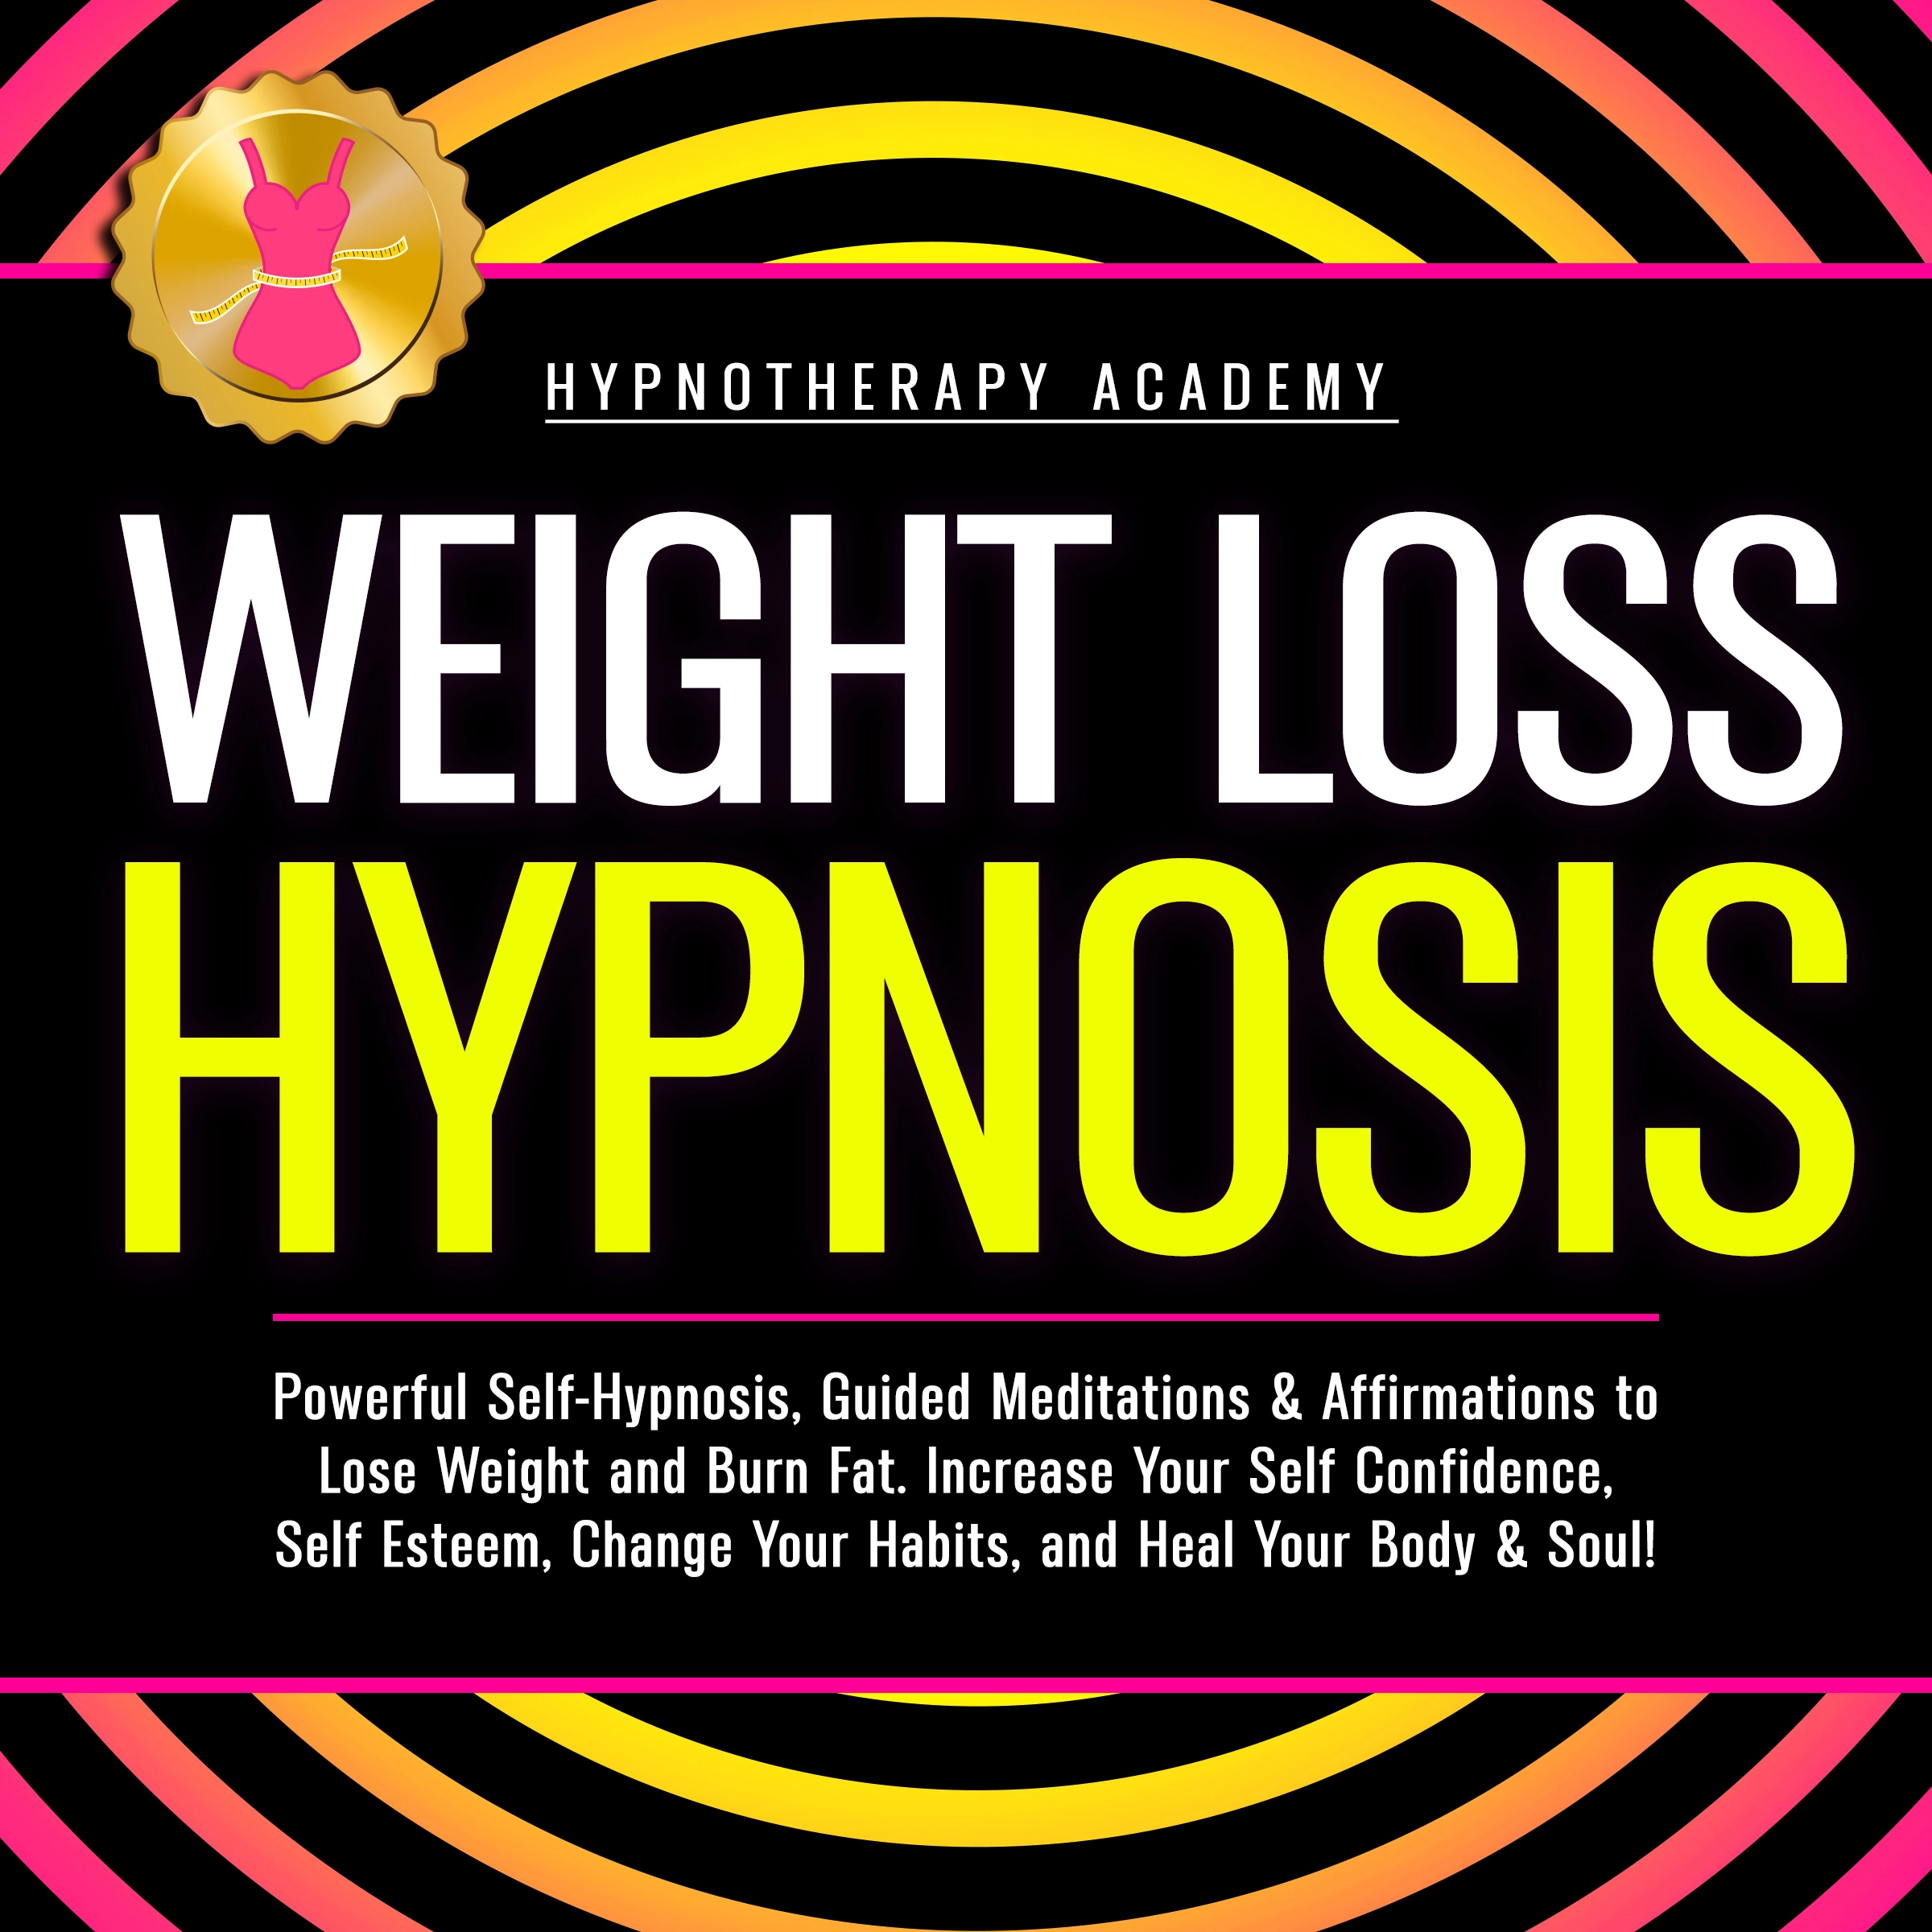 Weight Loss Hypnosis: Powerful Self-Hypnosis, Guided Meditations & Affirmations to Lose Weight and Burn Fat. Increase Your Self Confidence, Self Esteem, Change Your Habits, and Heal Your Body & Soul! Audiobook by Hypnotherapy Academy